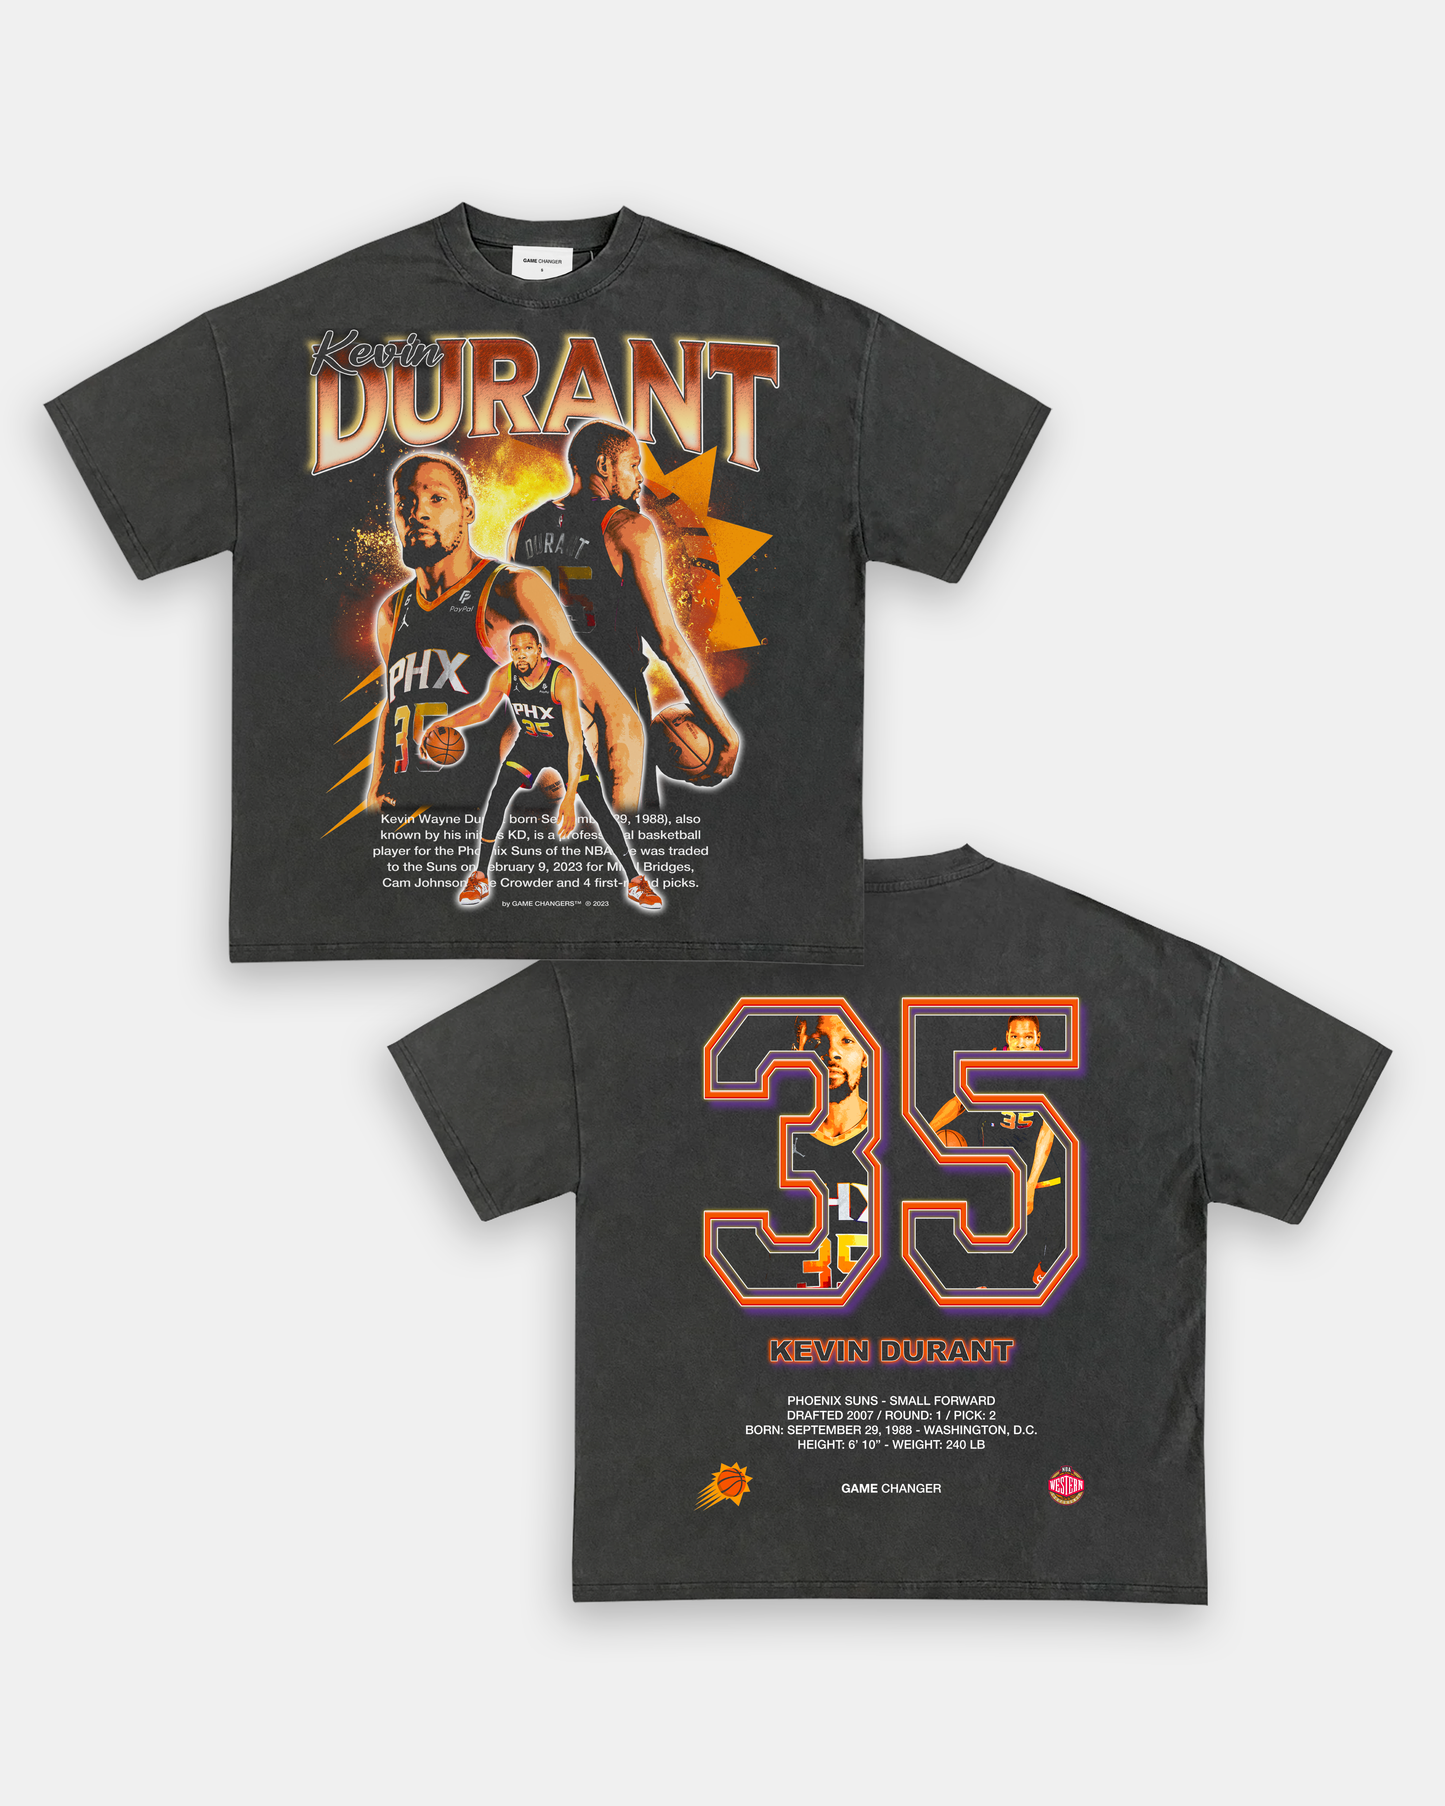 PHX KEVIN DURANT TEE - [DS]